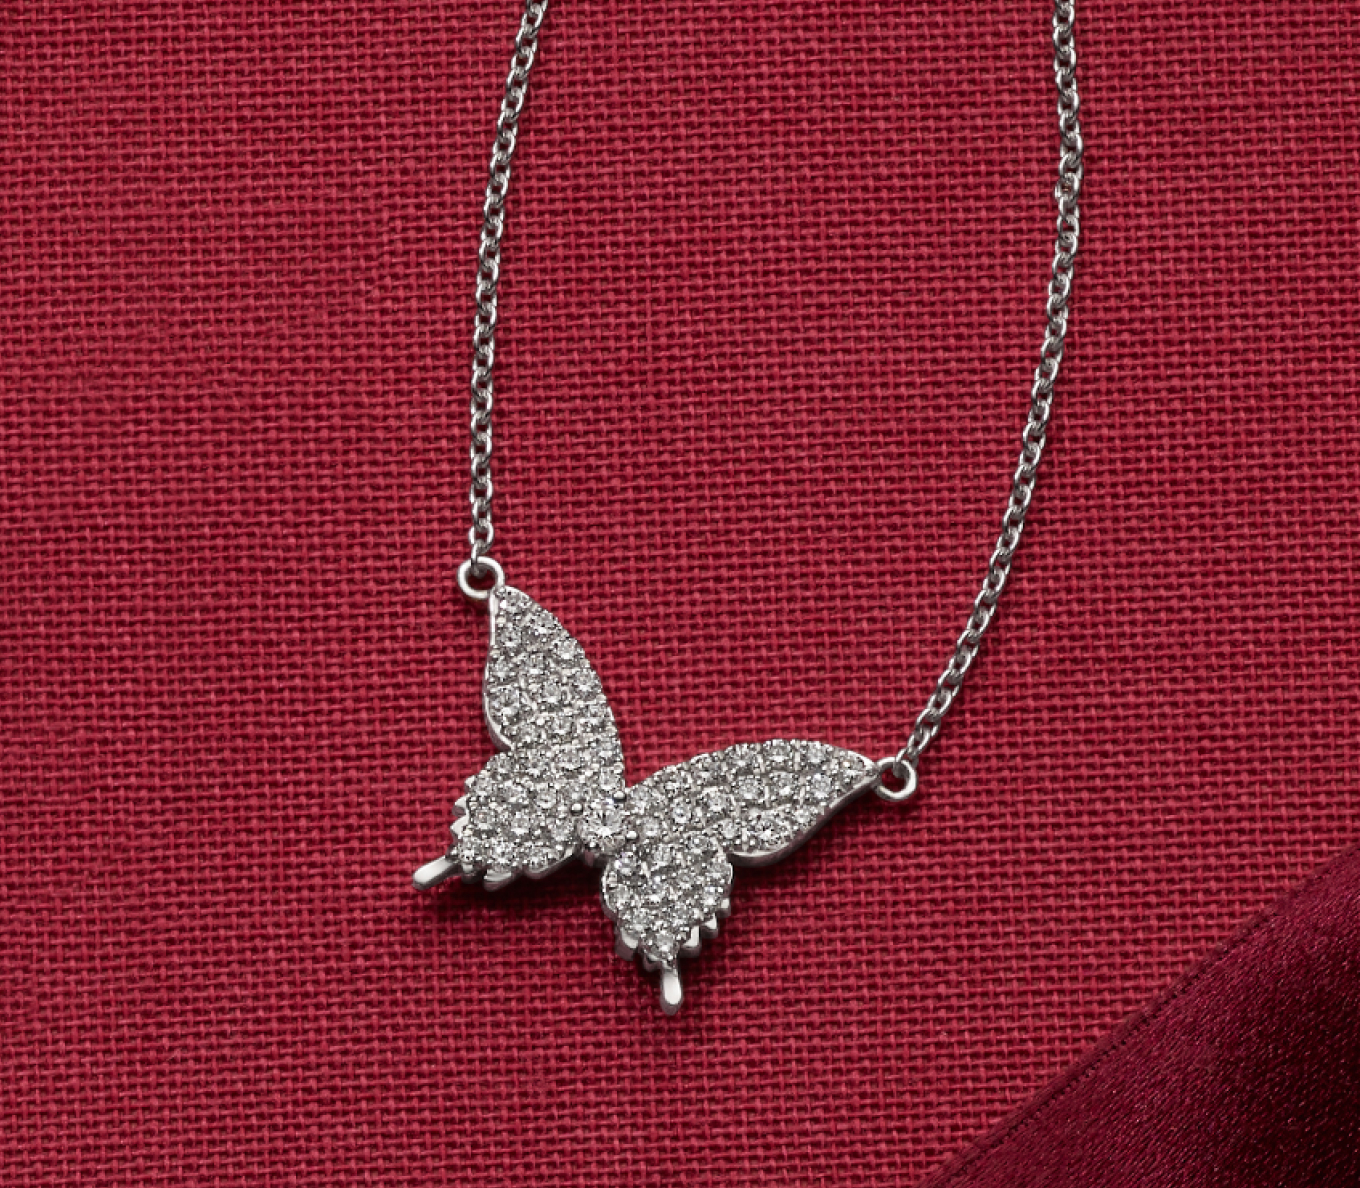 butterfly pendant necklace. Diamond Pave Butterfly Pendant
Natural diamond pavé makes this stylish 14-karat white gold butterfly pendant sparkle. Complete with an adjustable cable chain and secure lobster clasp, this necklace makes a beautiful gift or daily accessory.